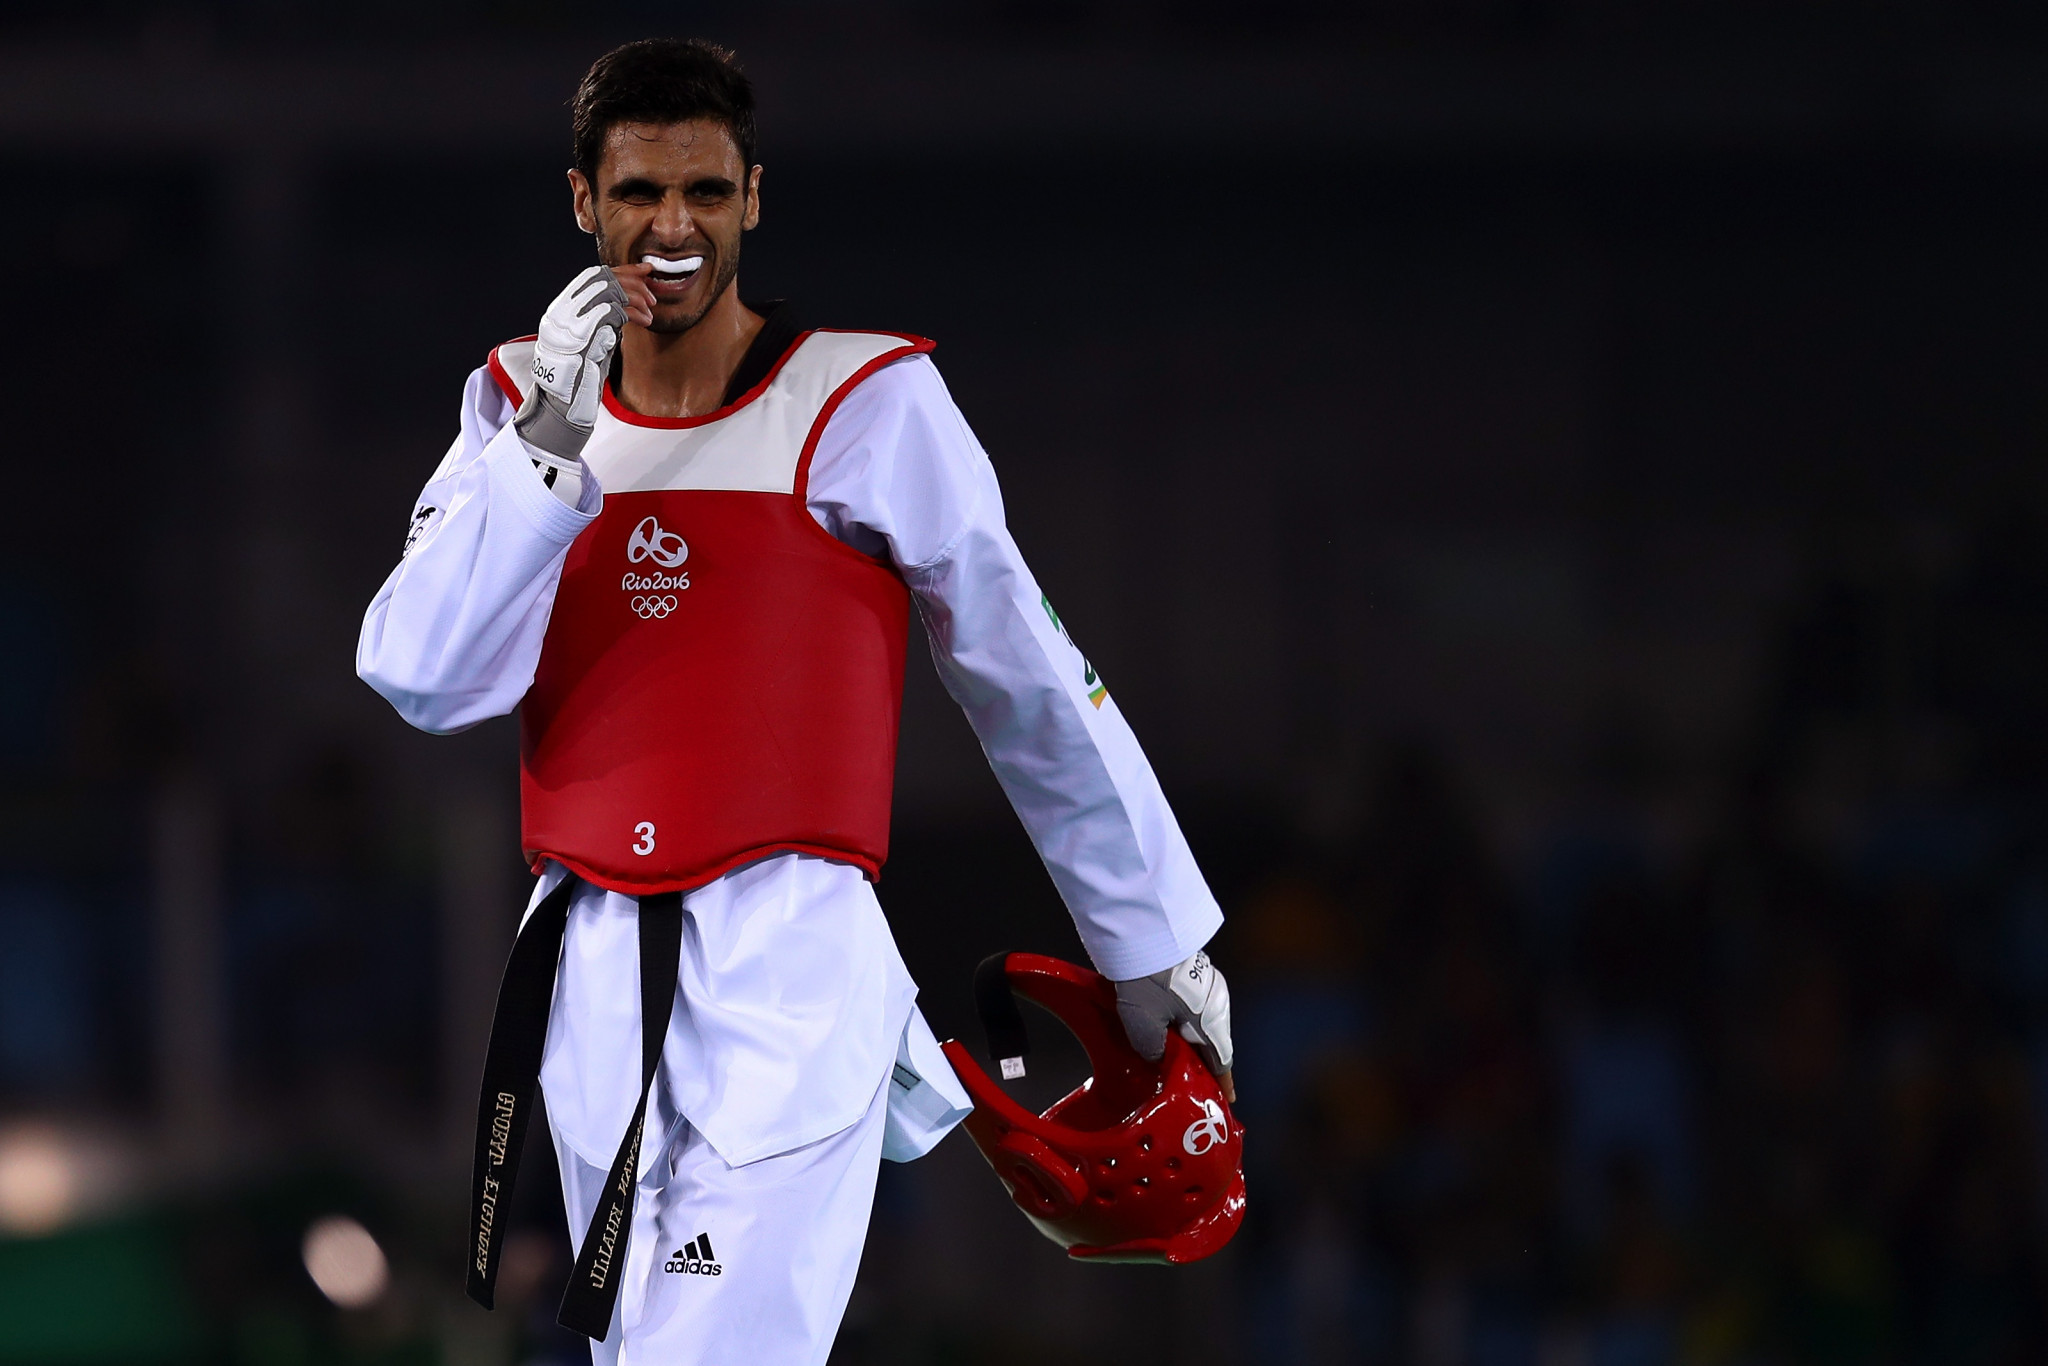 Safwan Khalil is among the Australian team for the competition in Athens ©Getty Images